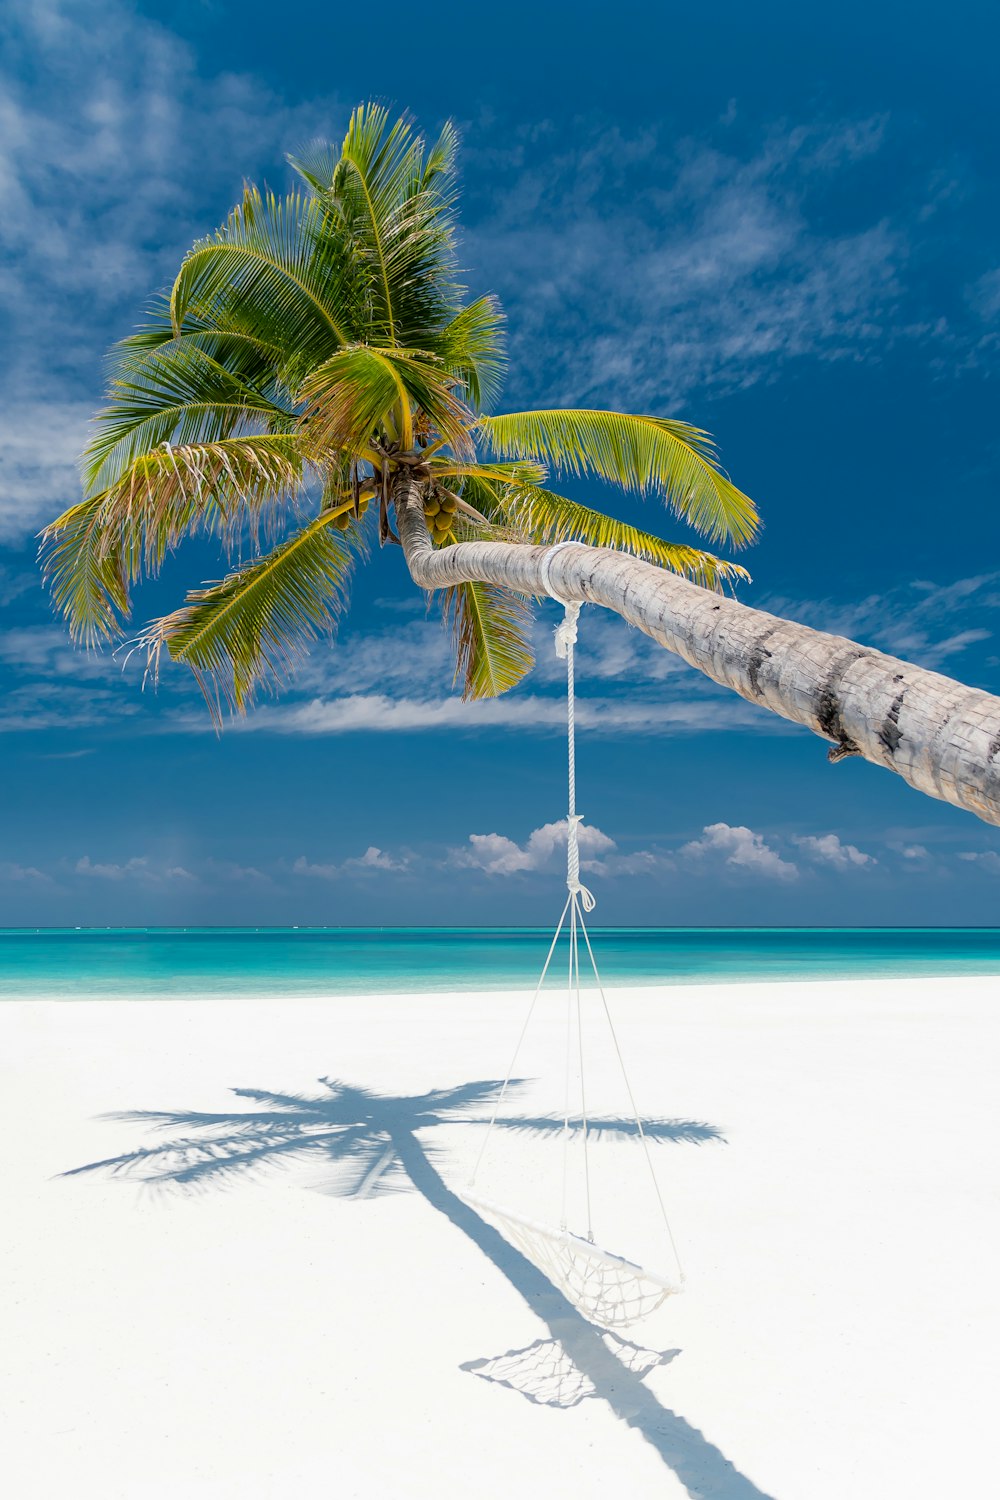 bent coconut tree with hammock near shore during daytime